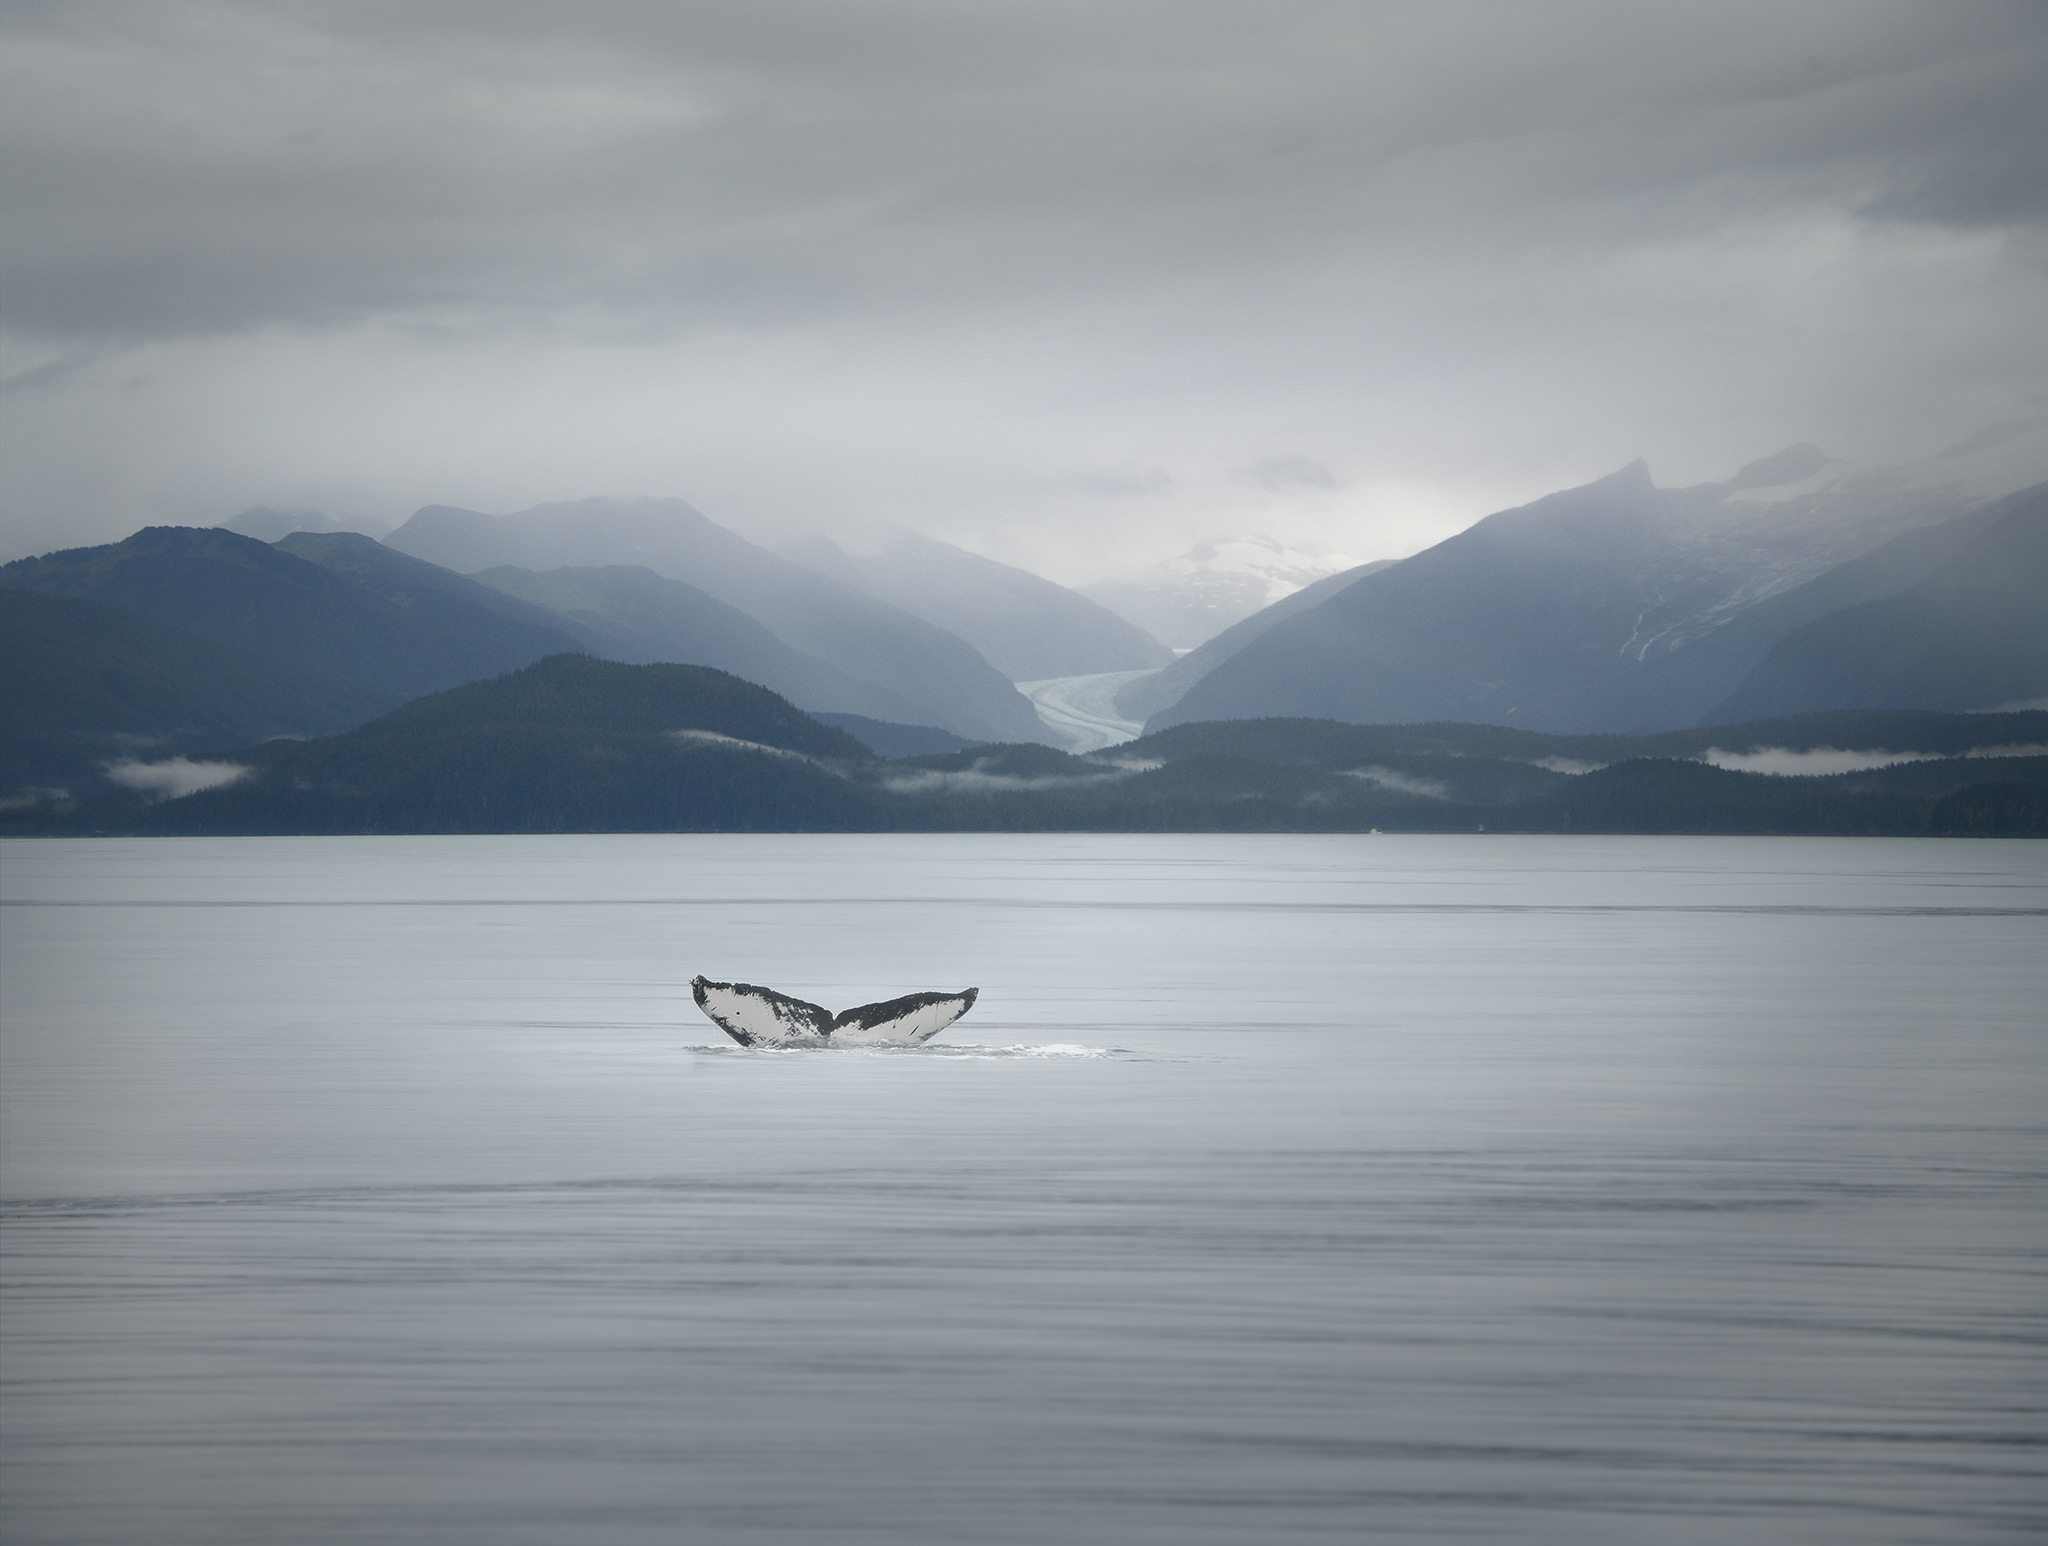 Whale Tail in Alaska